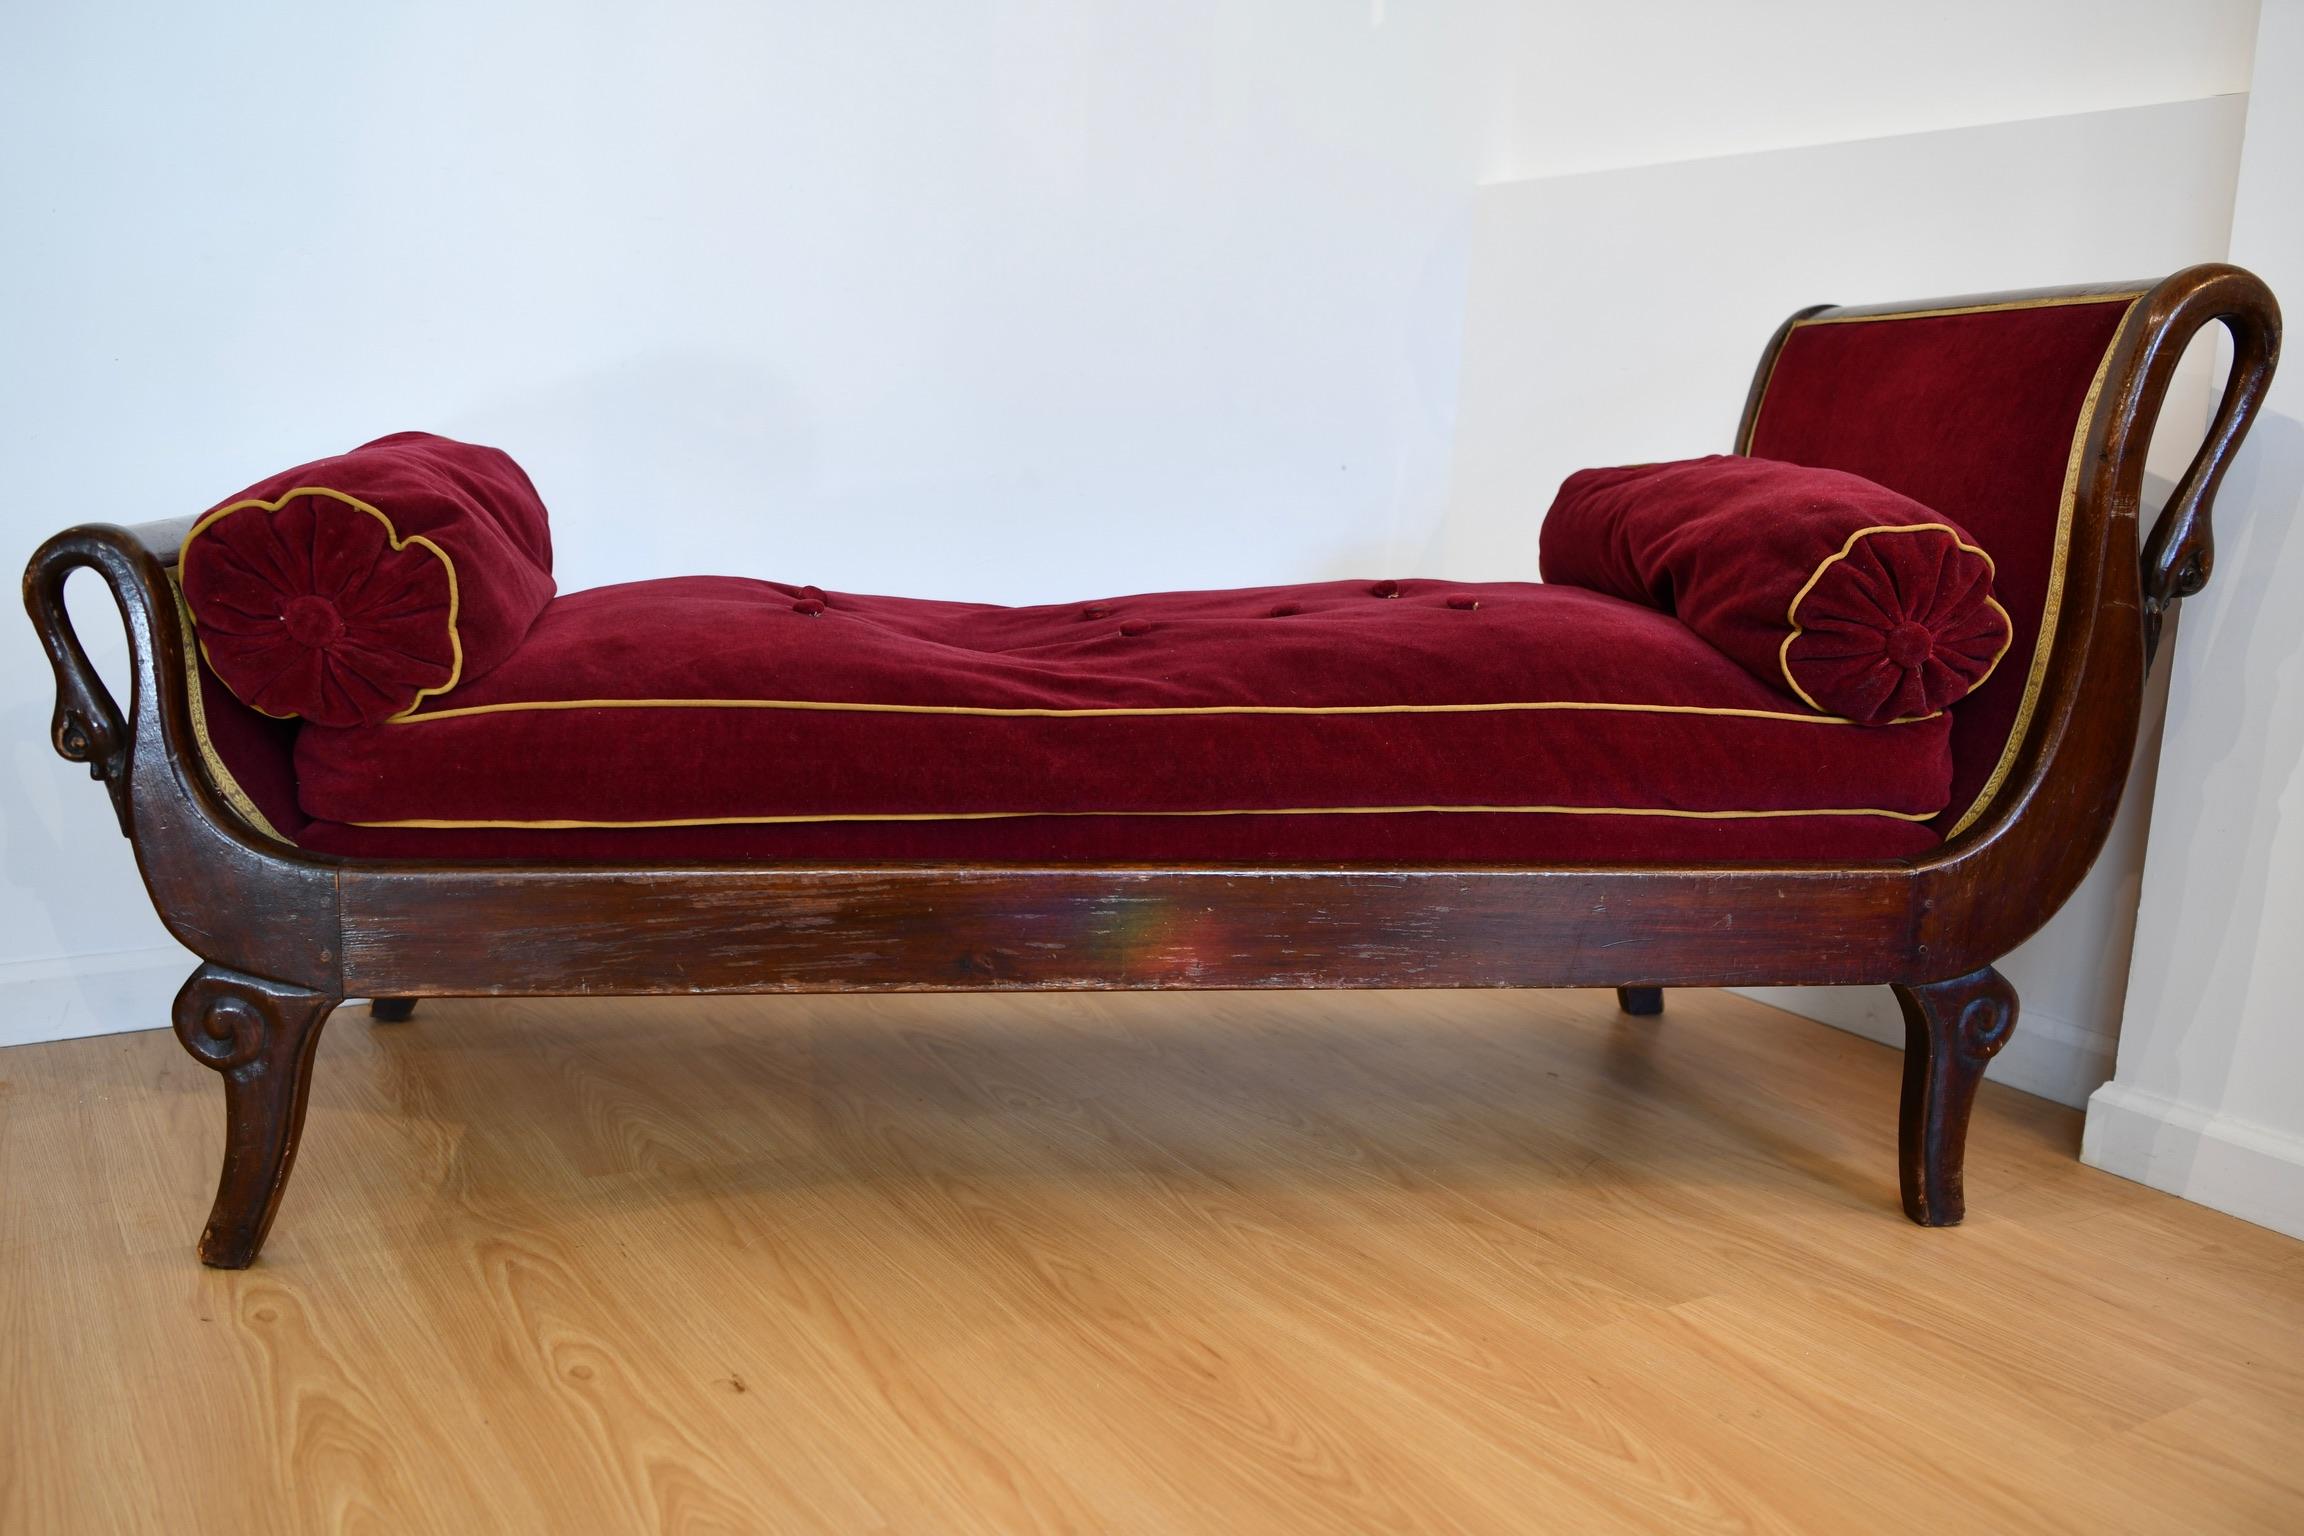 Antique French Mahogany Swan Decorated Chaise Longue For Sale 9